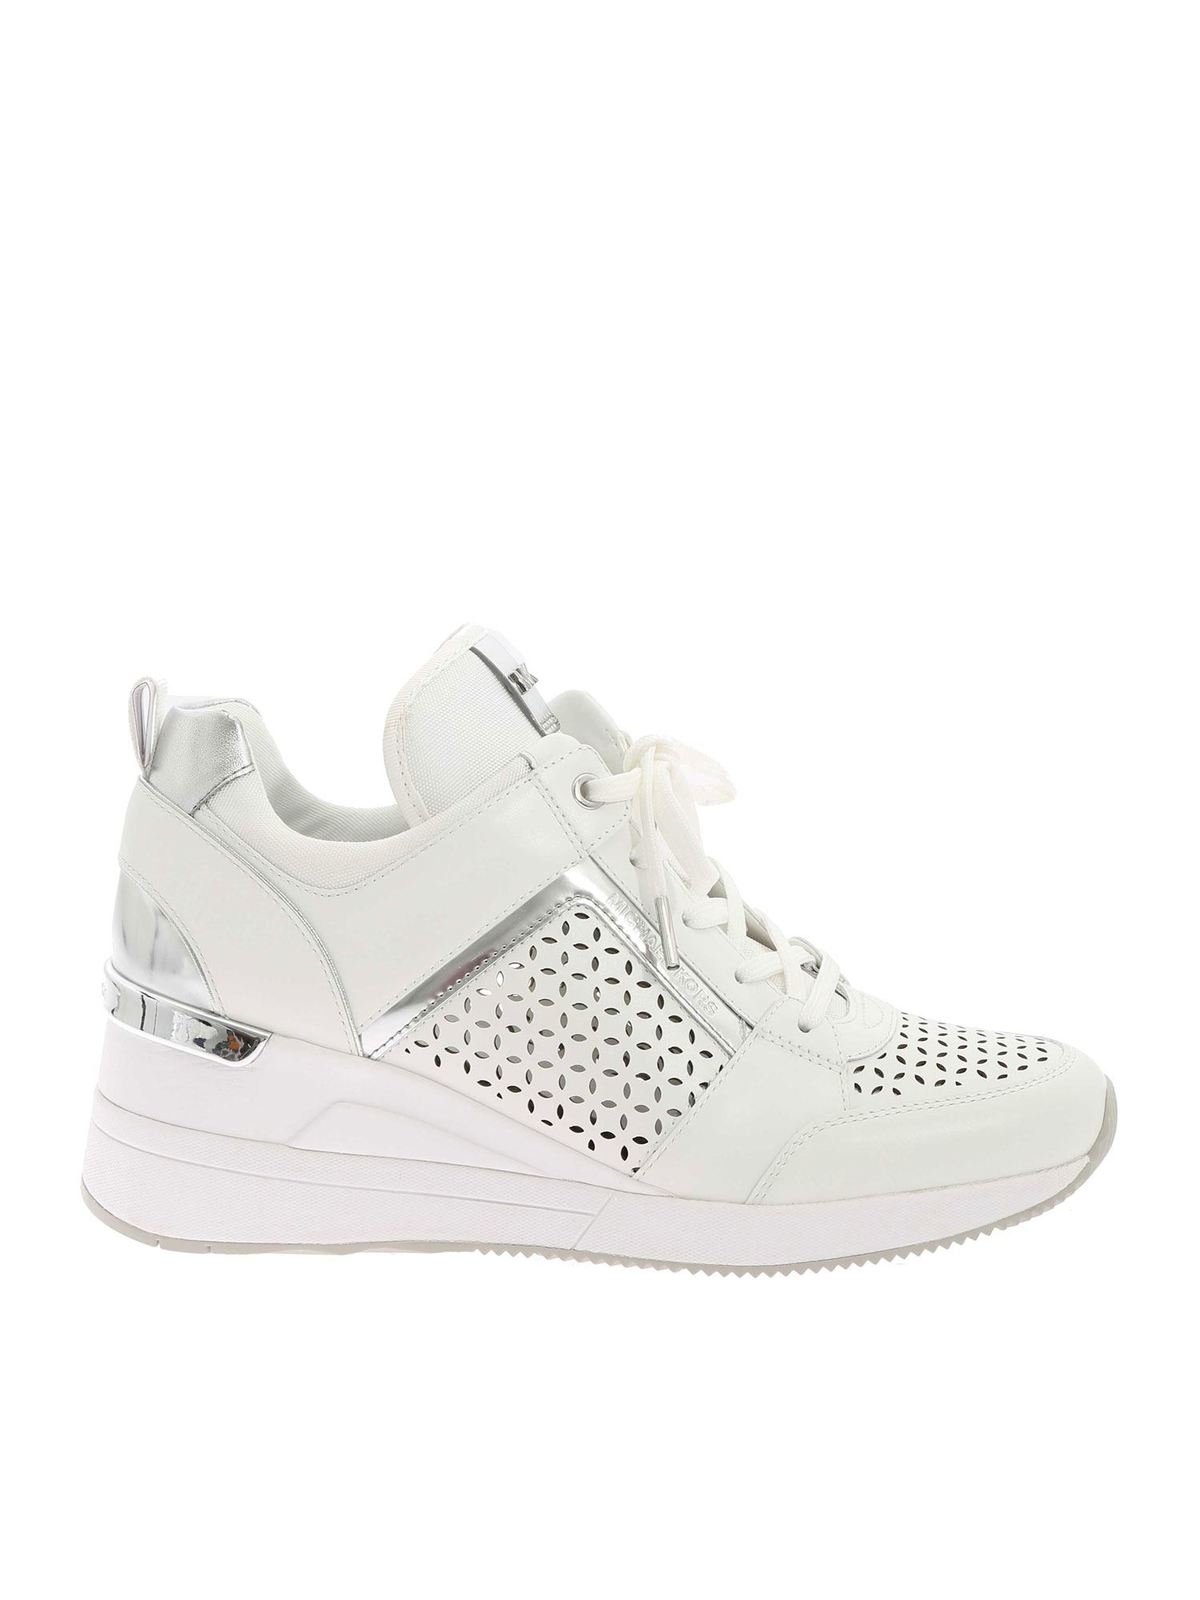 Michael Kors - Georgie sneakers in white and silver color - trainers ...